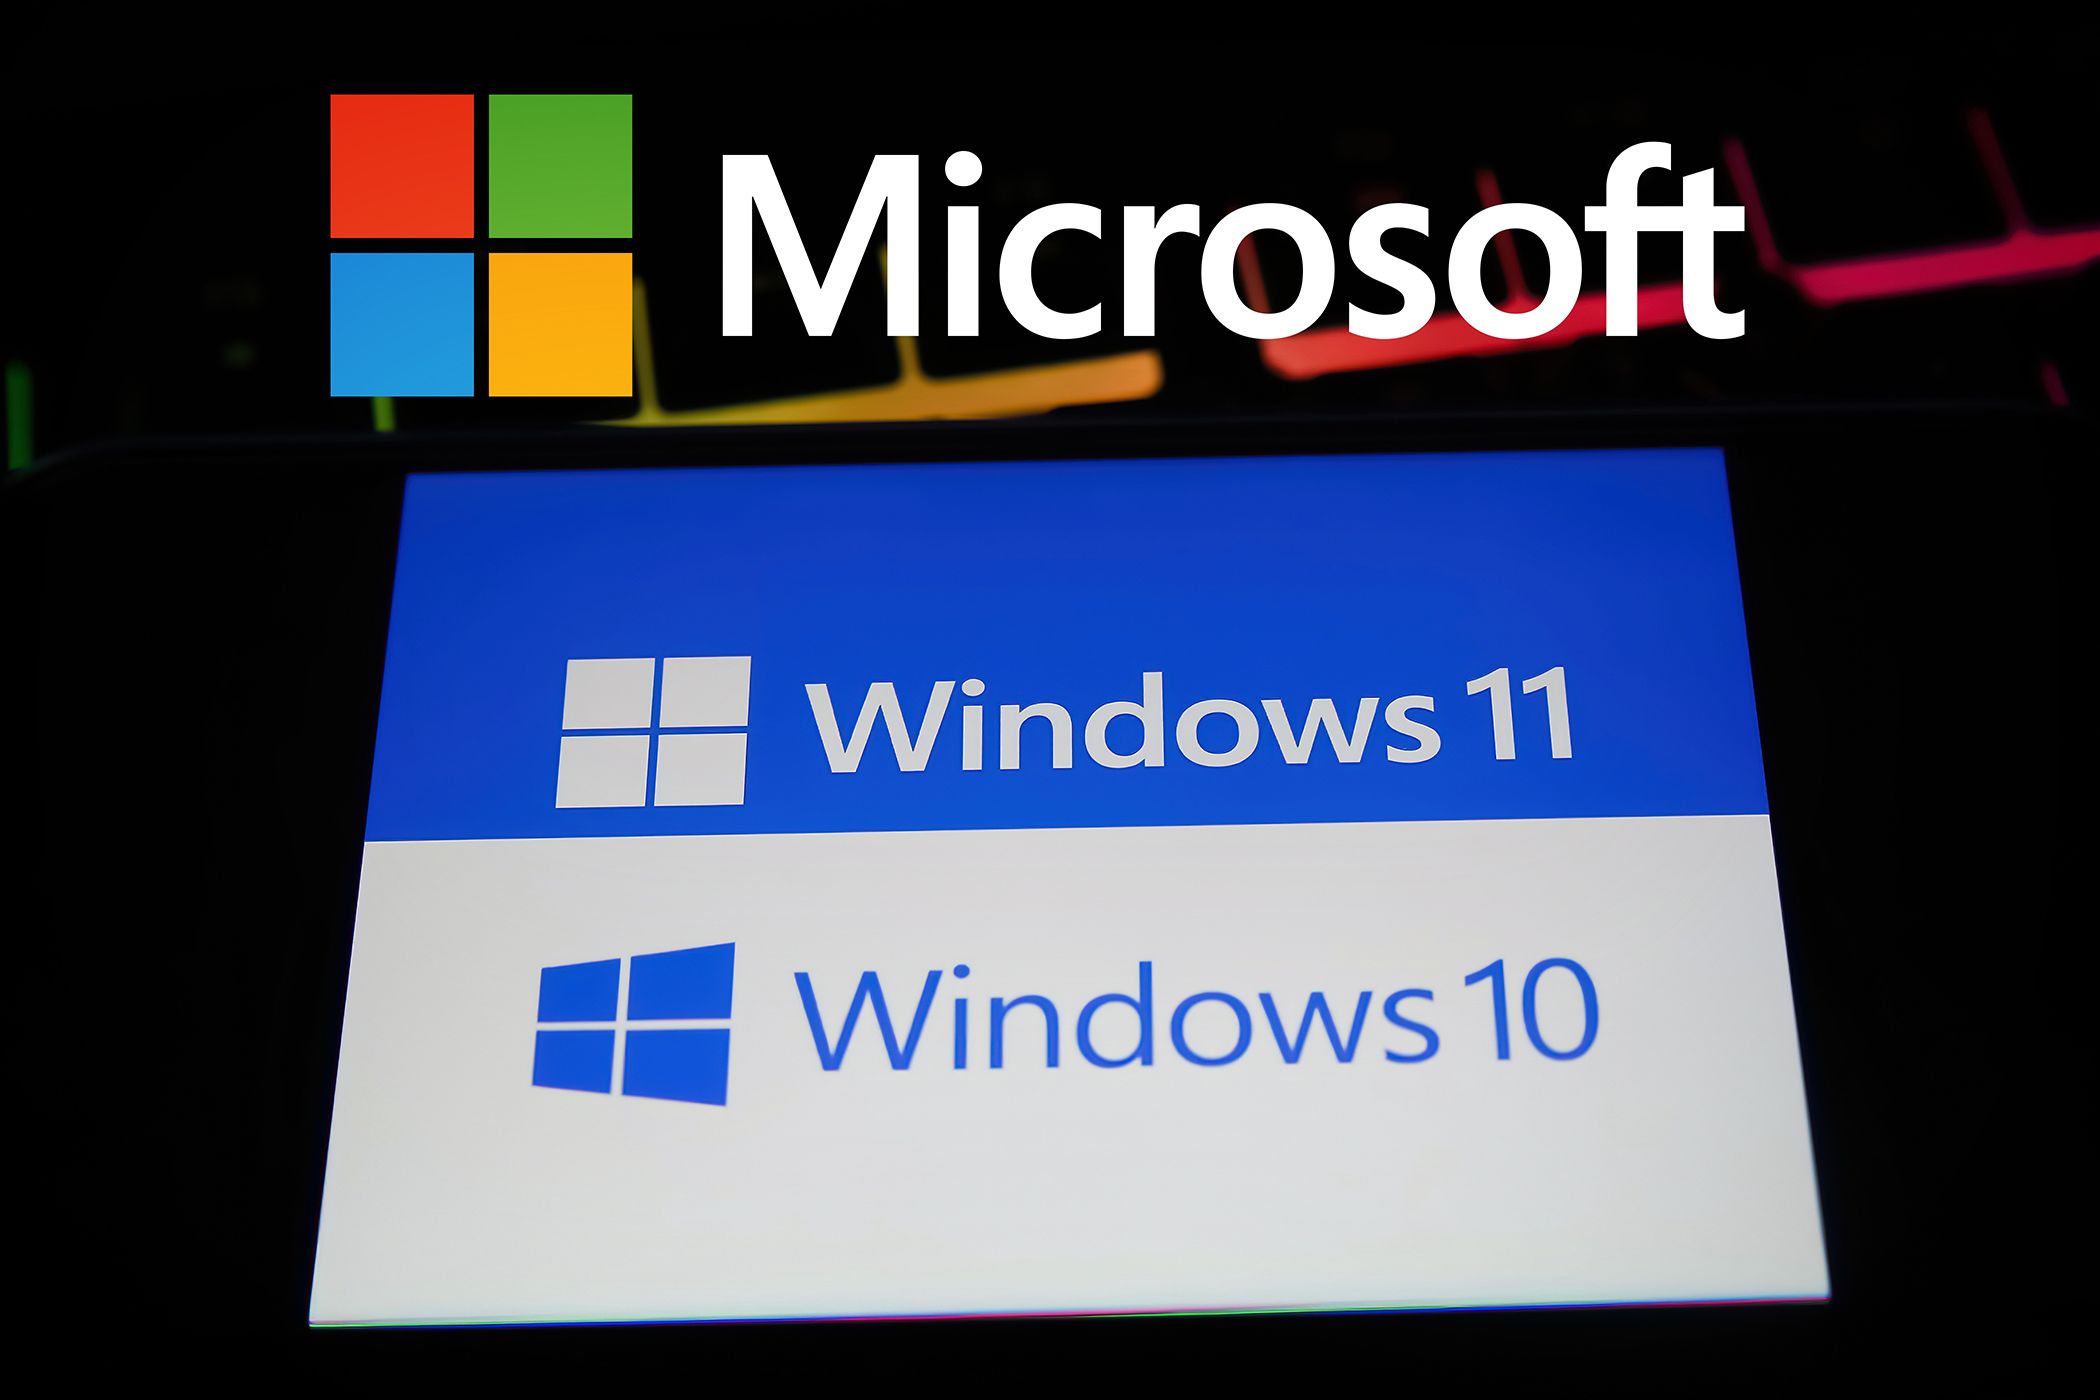 Microsoft logo above a screen showing Windows 11 and Windows 10 logos, highlighting different versions of the operating system.